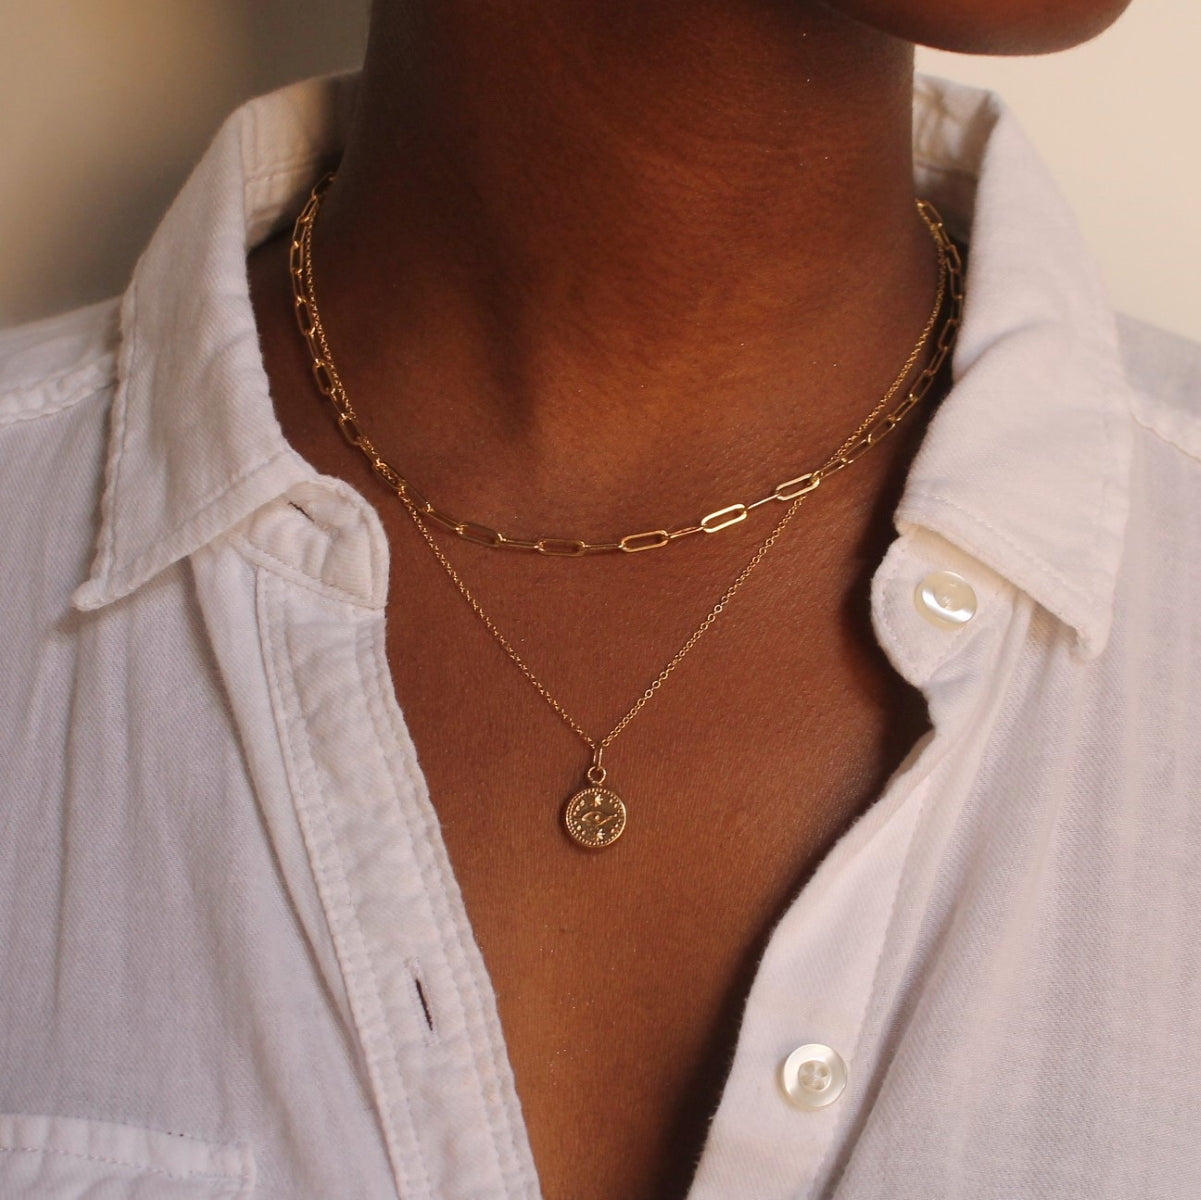 Model wearing gold elongated link necklace and gold evil eye necklace